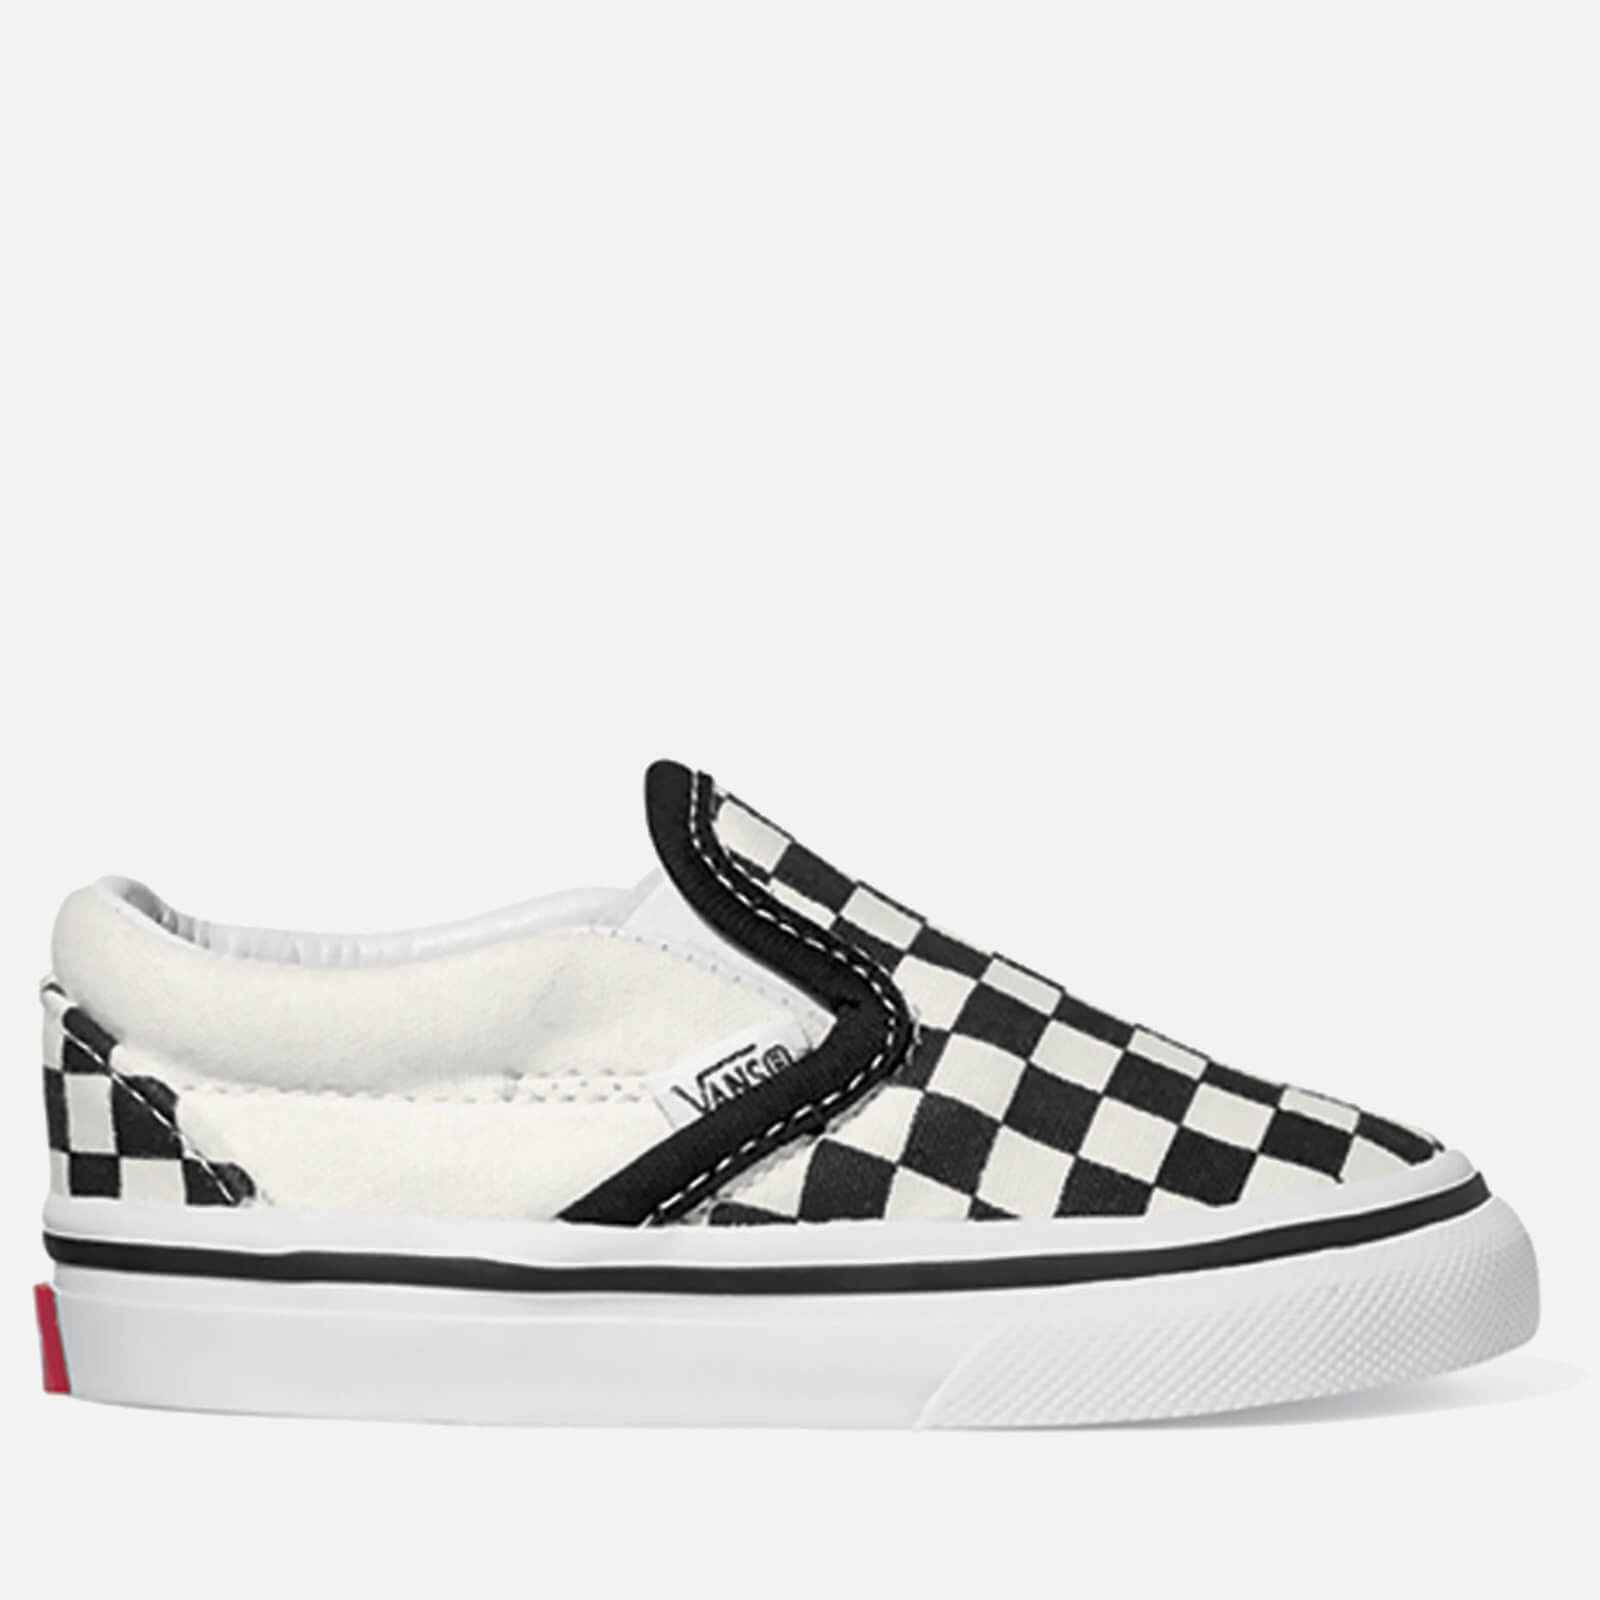 Vans Toddlers' Classic Slip On Checkerboard Trainers - Black / White - UK 4 Baby